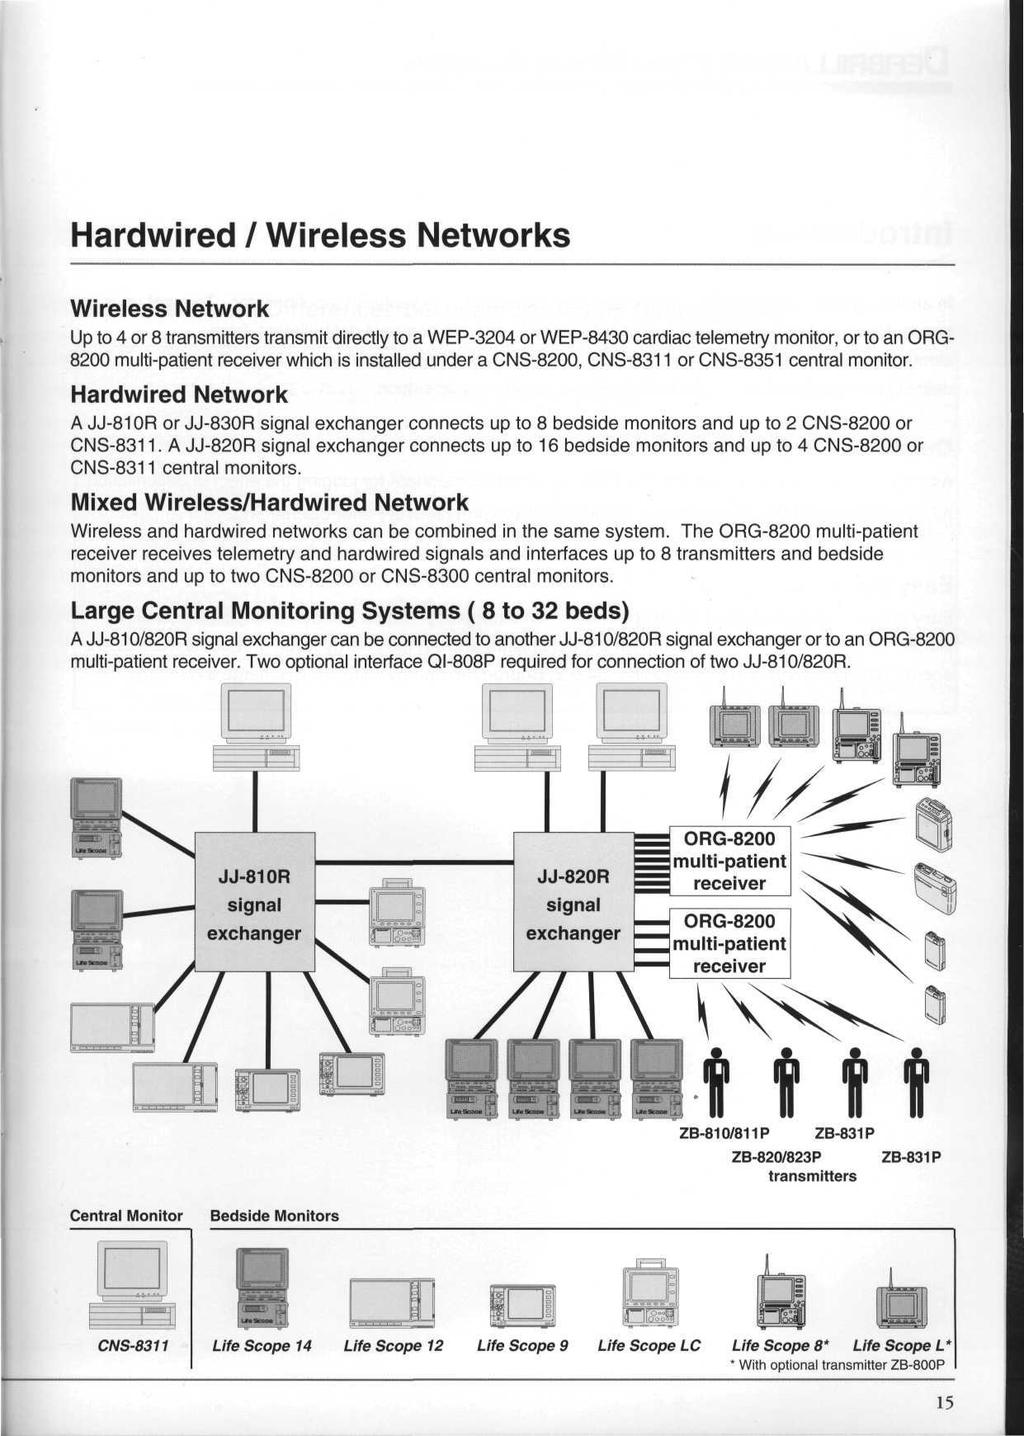 Hardwired Wireless Networks Wireless Network Up to 4 or 8 transmitters transmit directly to a WEP-3204 or WEP-8430 cardiac telemetry monitor, or to an ORG- 8200 multi-patient receiver which is